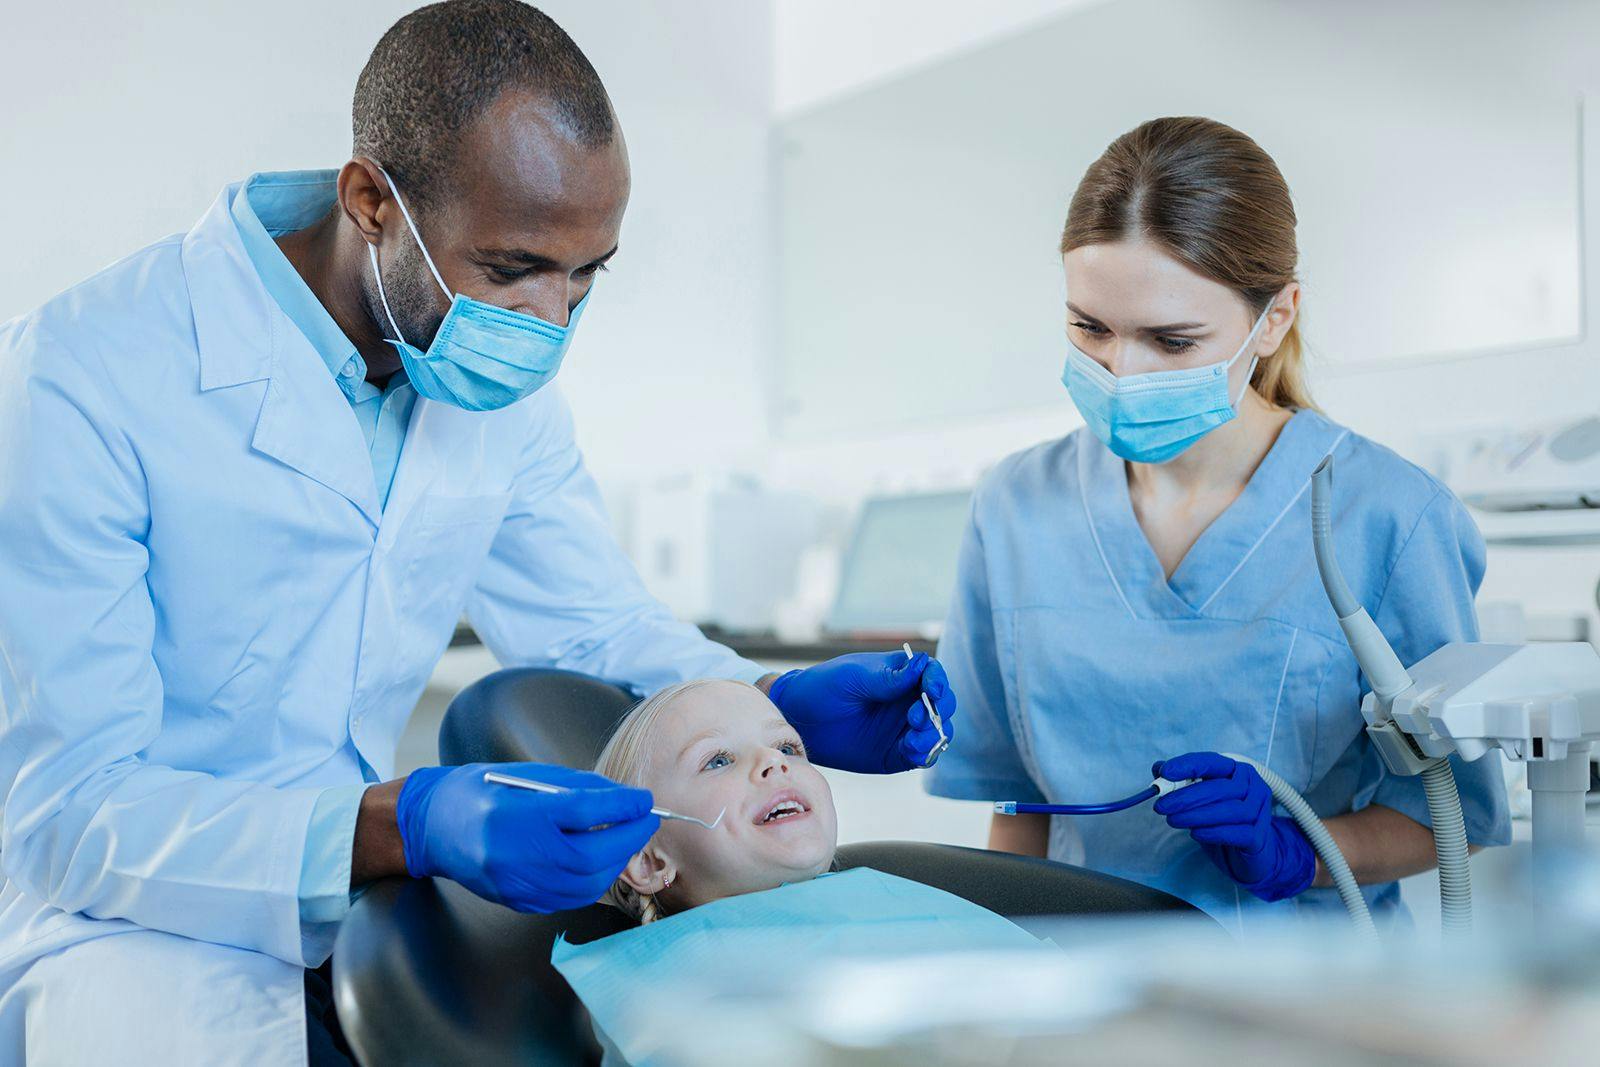 Mentorship is Crucial to the Practice of Dental Hygiene | Image Credit: stock.adobe.com / zinkevych